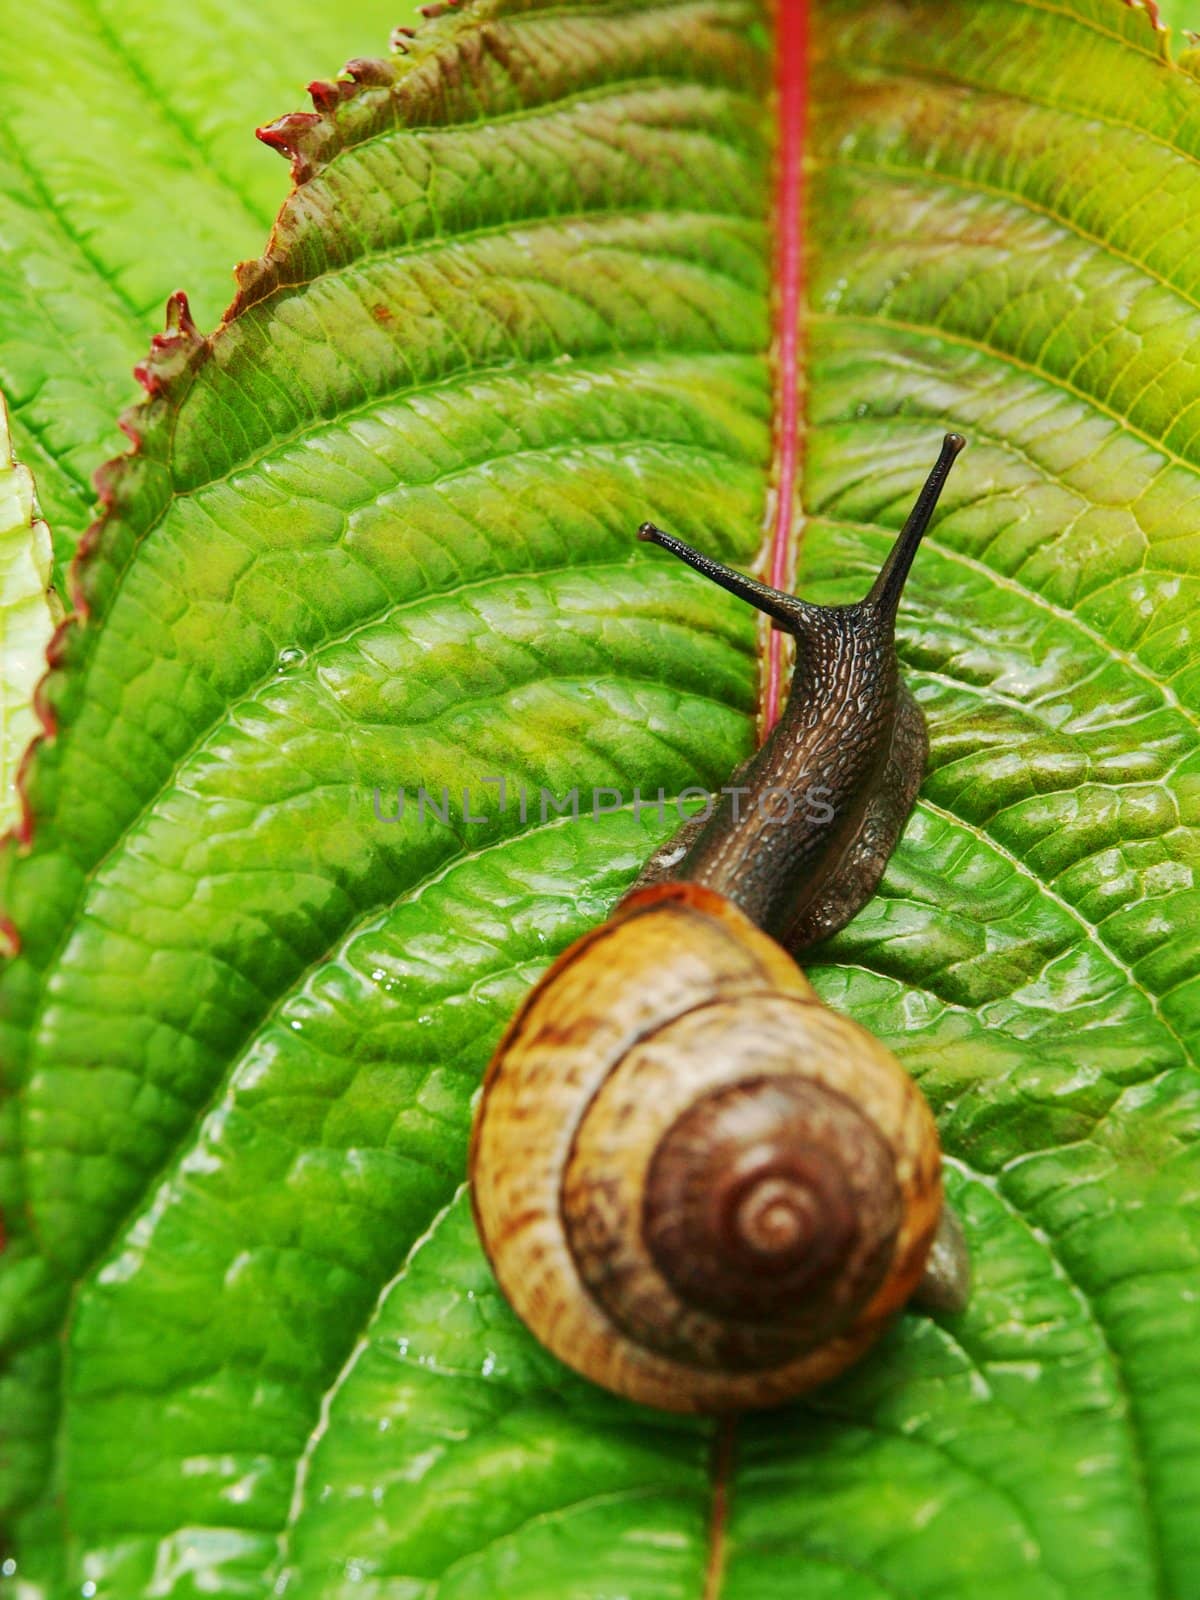 Snail with house by Arvebettum